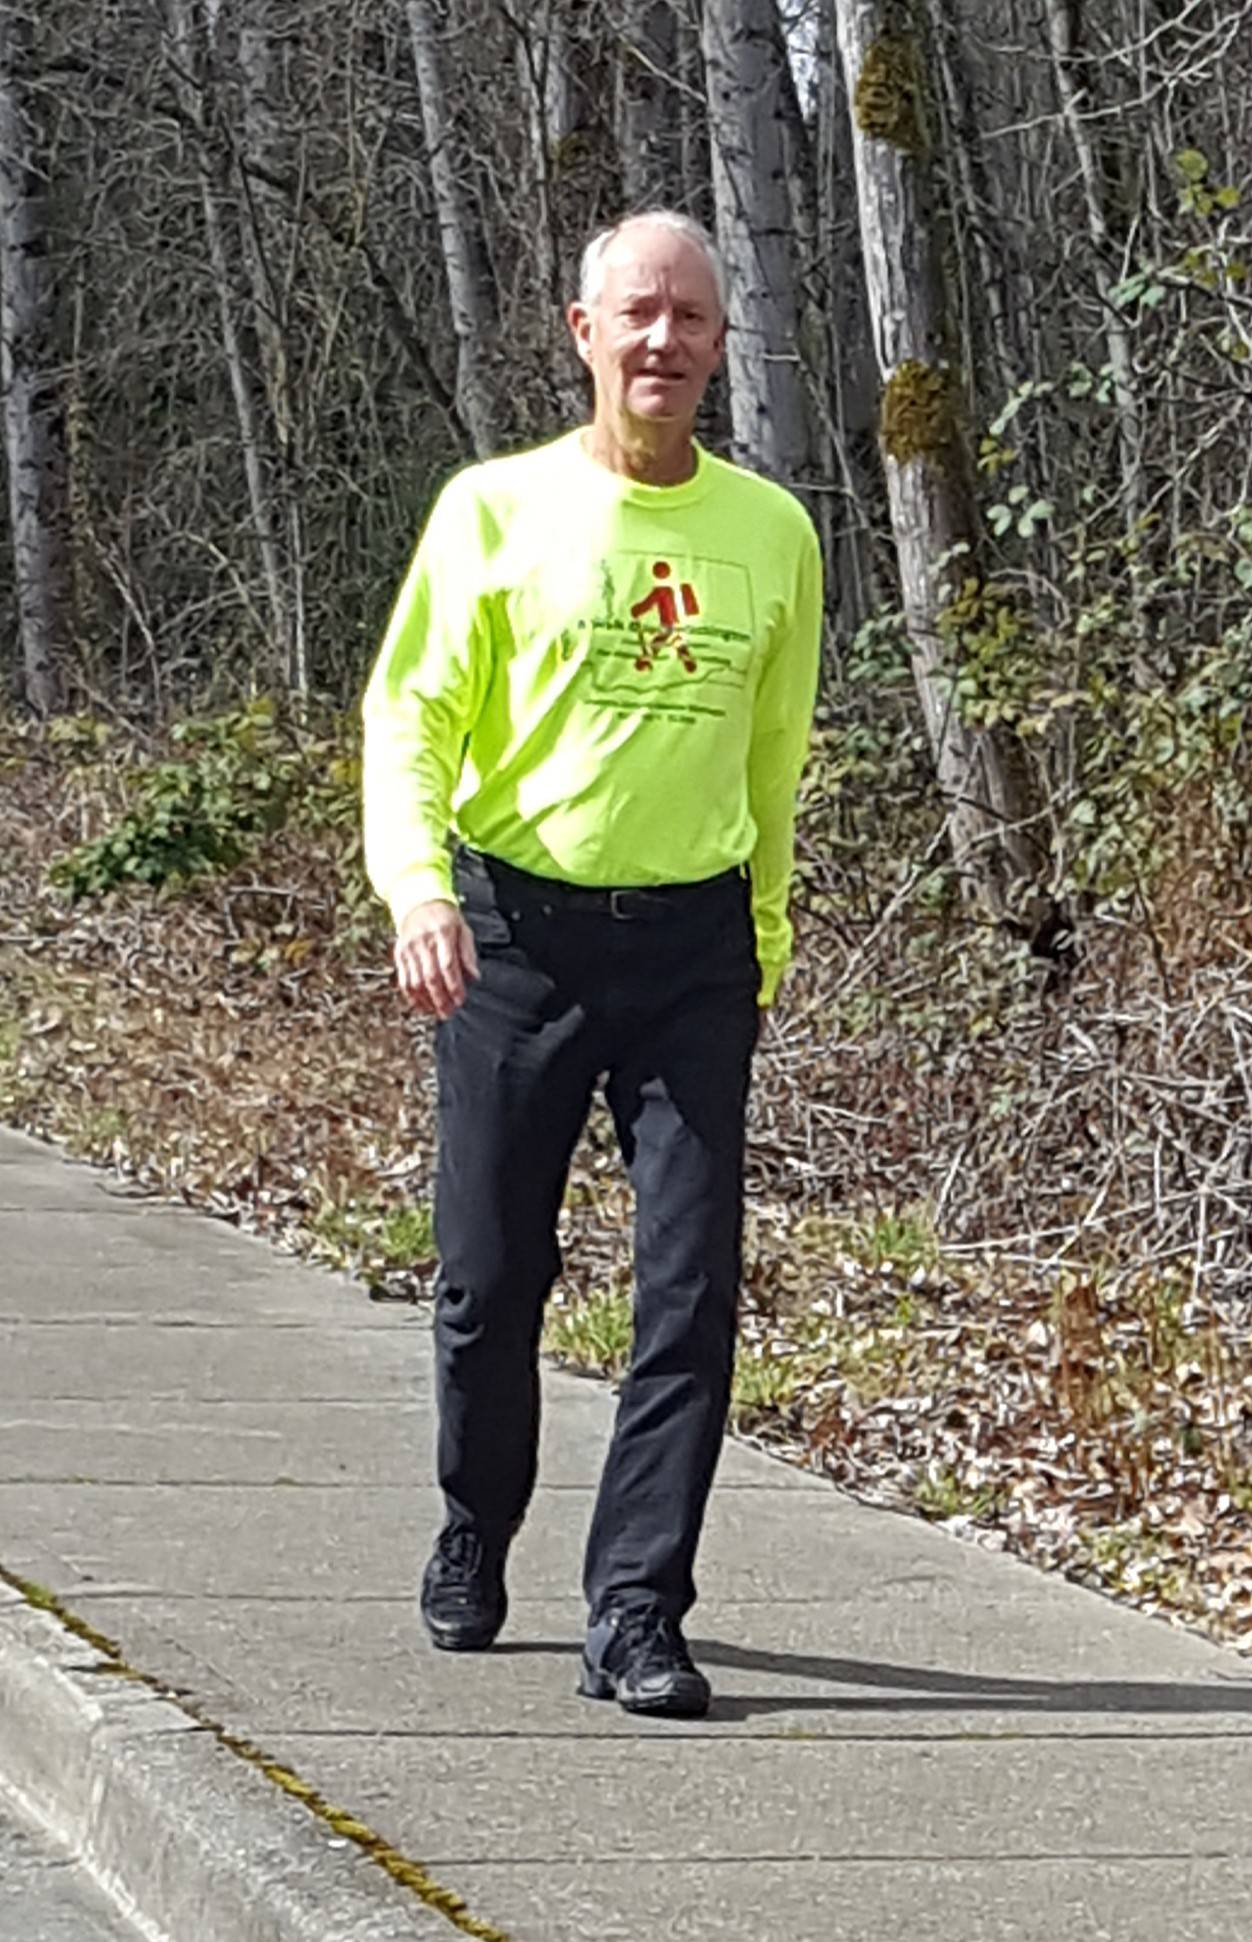 Kirkland resident Don Muggli prepares for his walk across the state to raise awareness about colon cancer and raise funds for the Virginia Mason Cancer Institute. Contributed photo